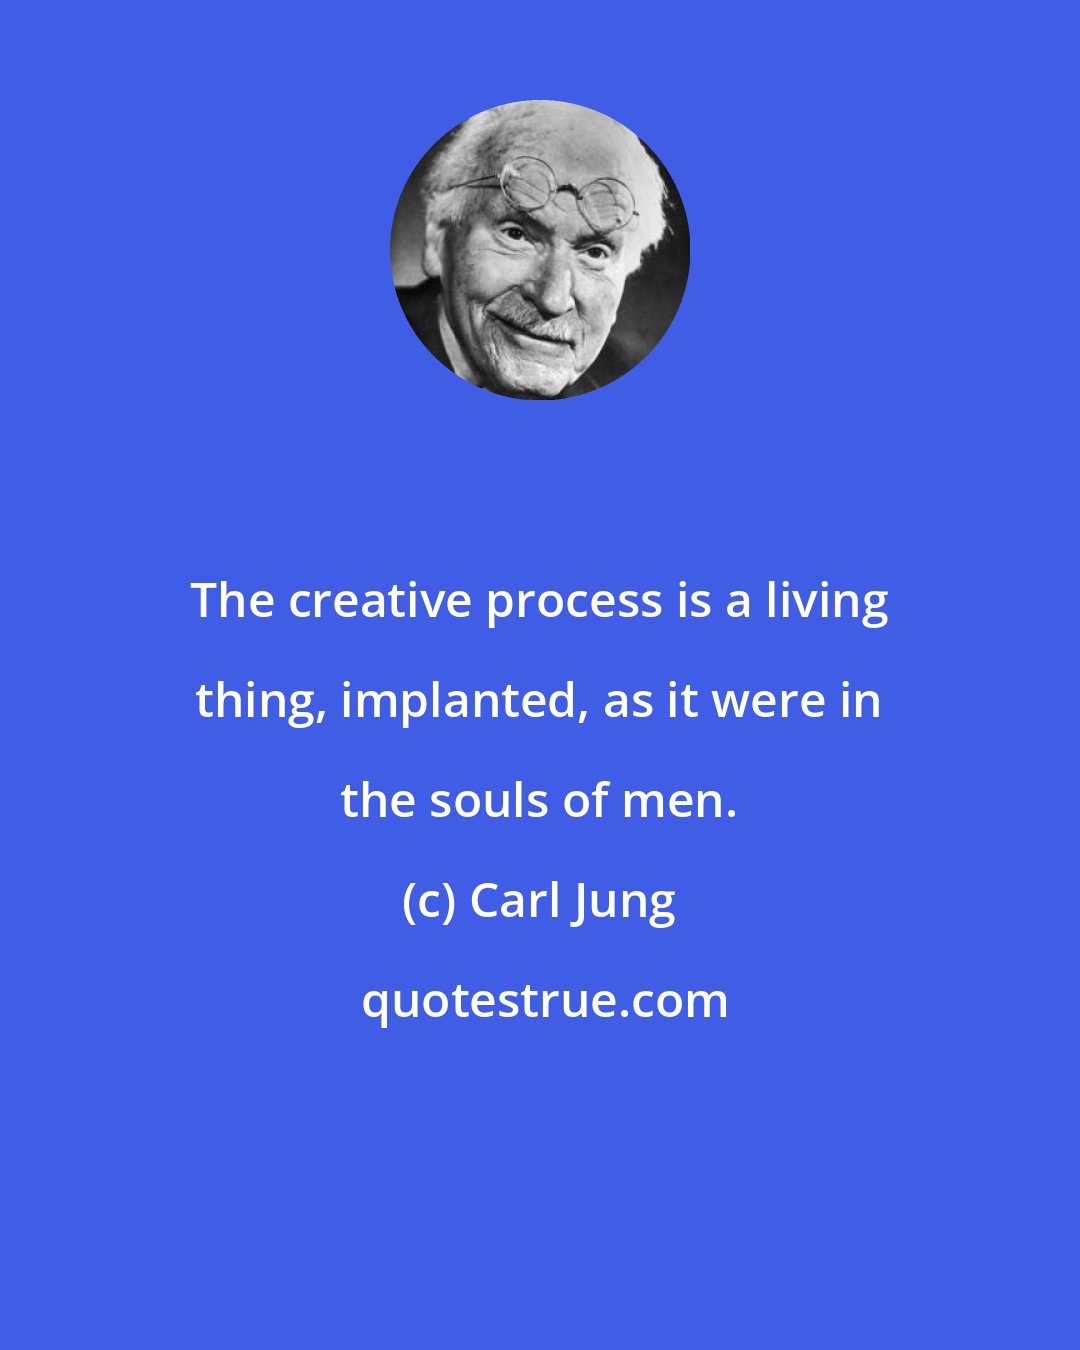 Carl Jung: The creative process is a living thing, implanted, as it were in the souls of men.